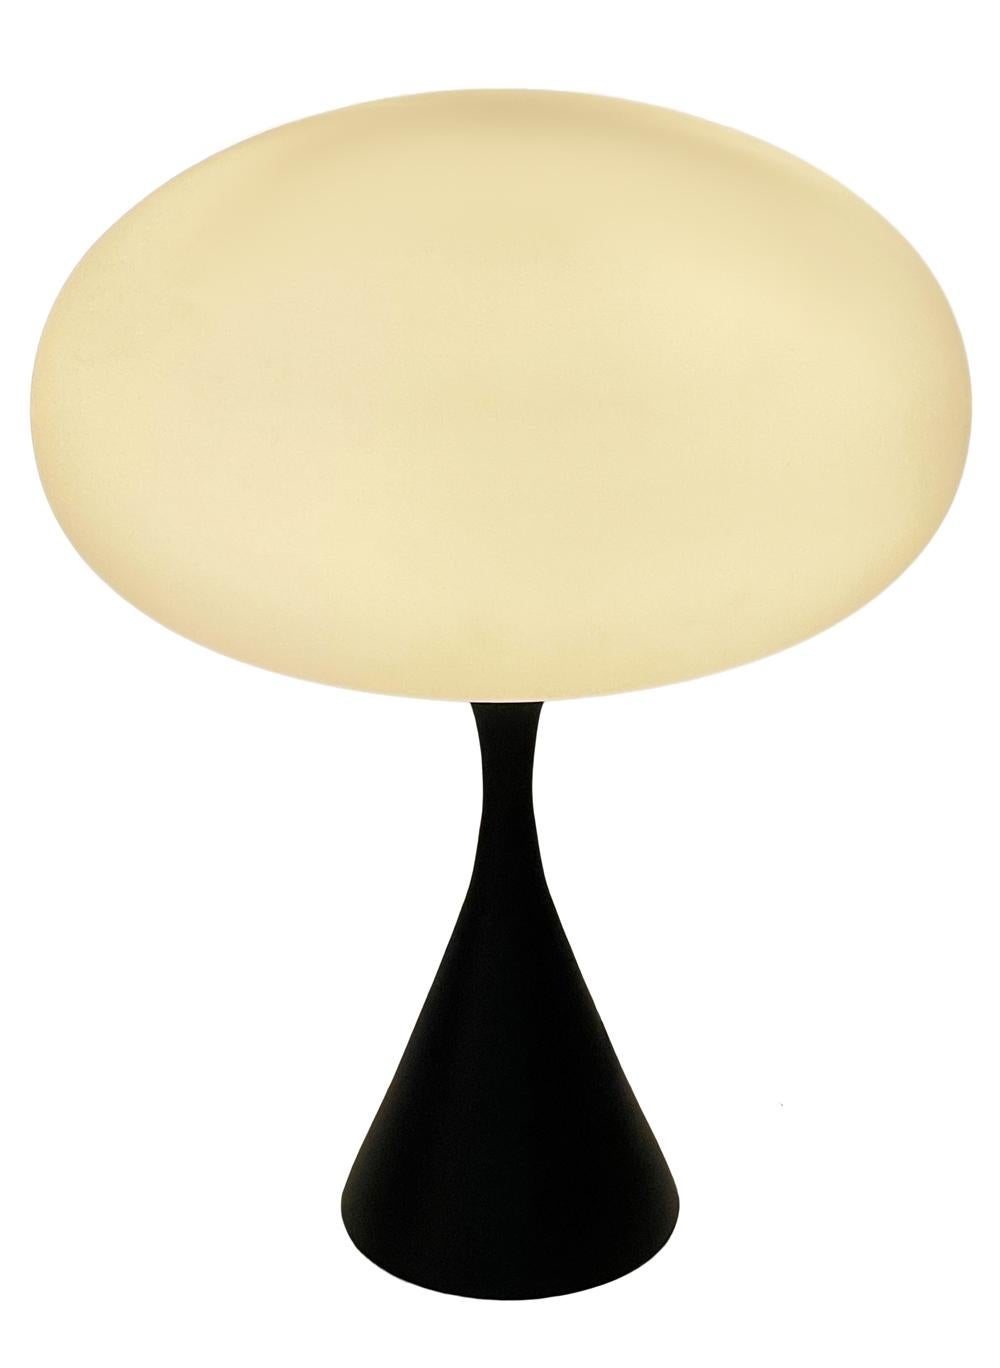 Contemporary Mid-Century Modern Mushroom Table Lamp by Designline in Black & White For Sale